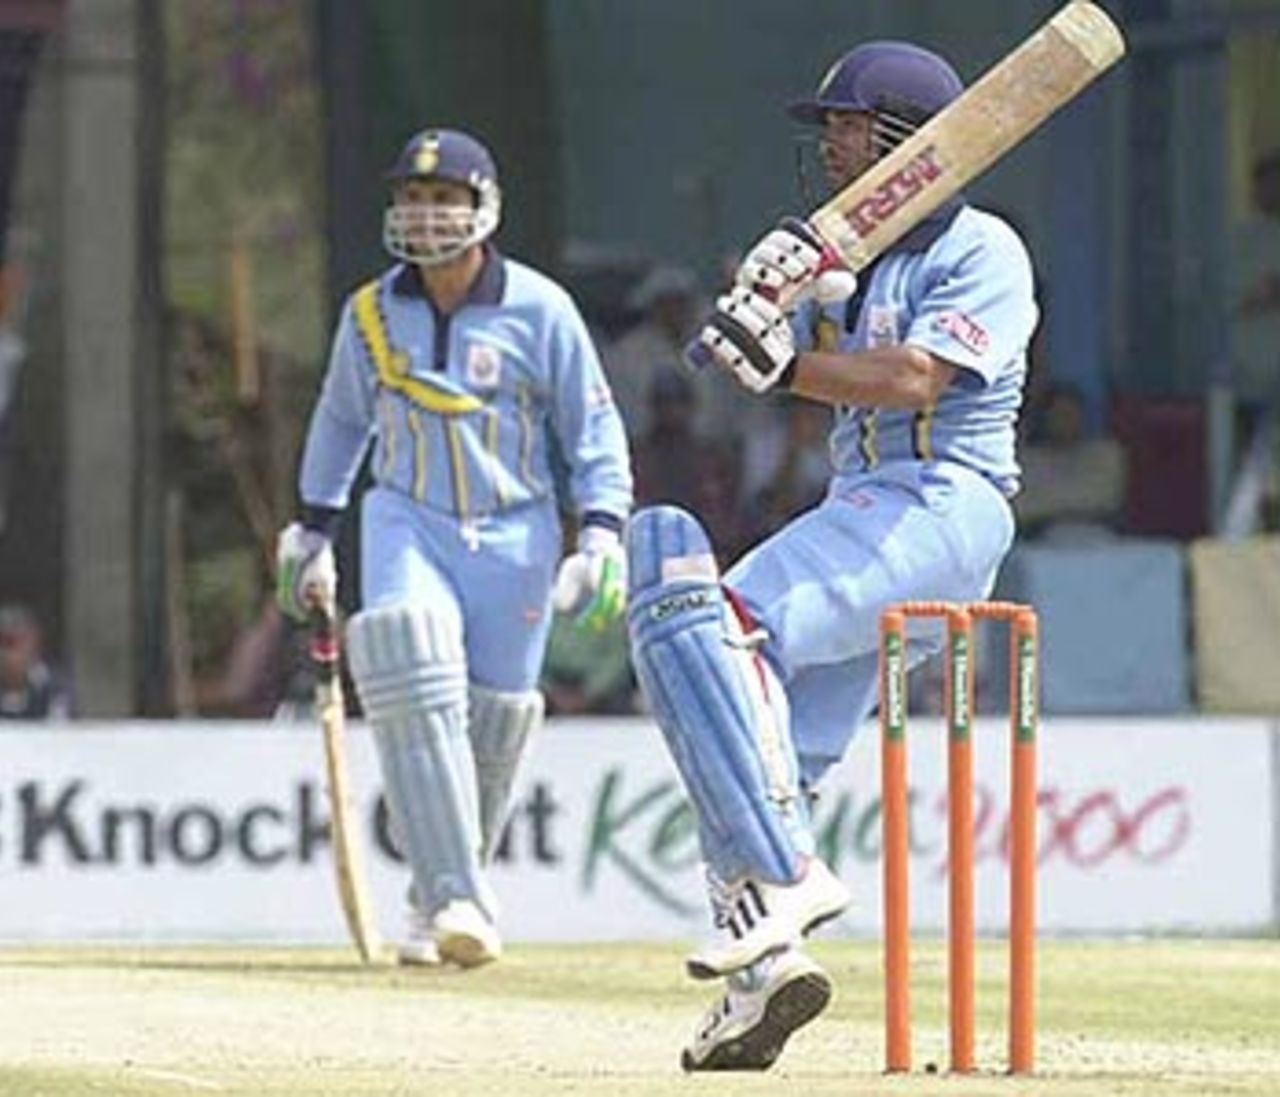 Sachin plays the pull shot to perfection, ICC KnockOut, 2000/01, Final, India v New Zealand, Gymkhana Club Ground, Nairobi, 15 October 2000.